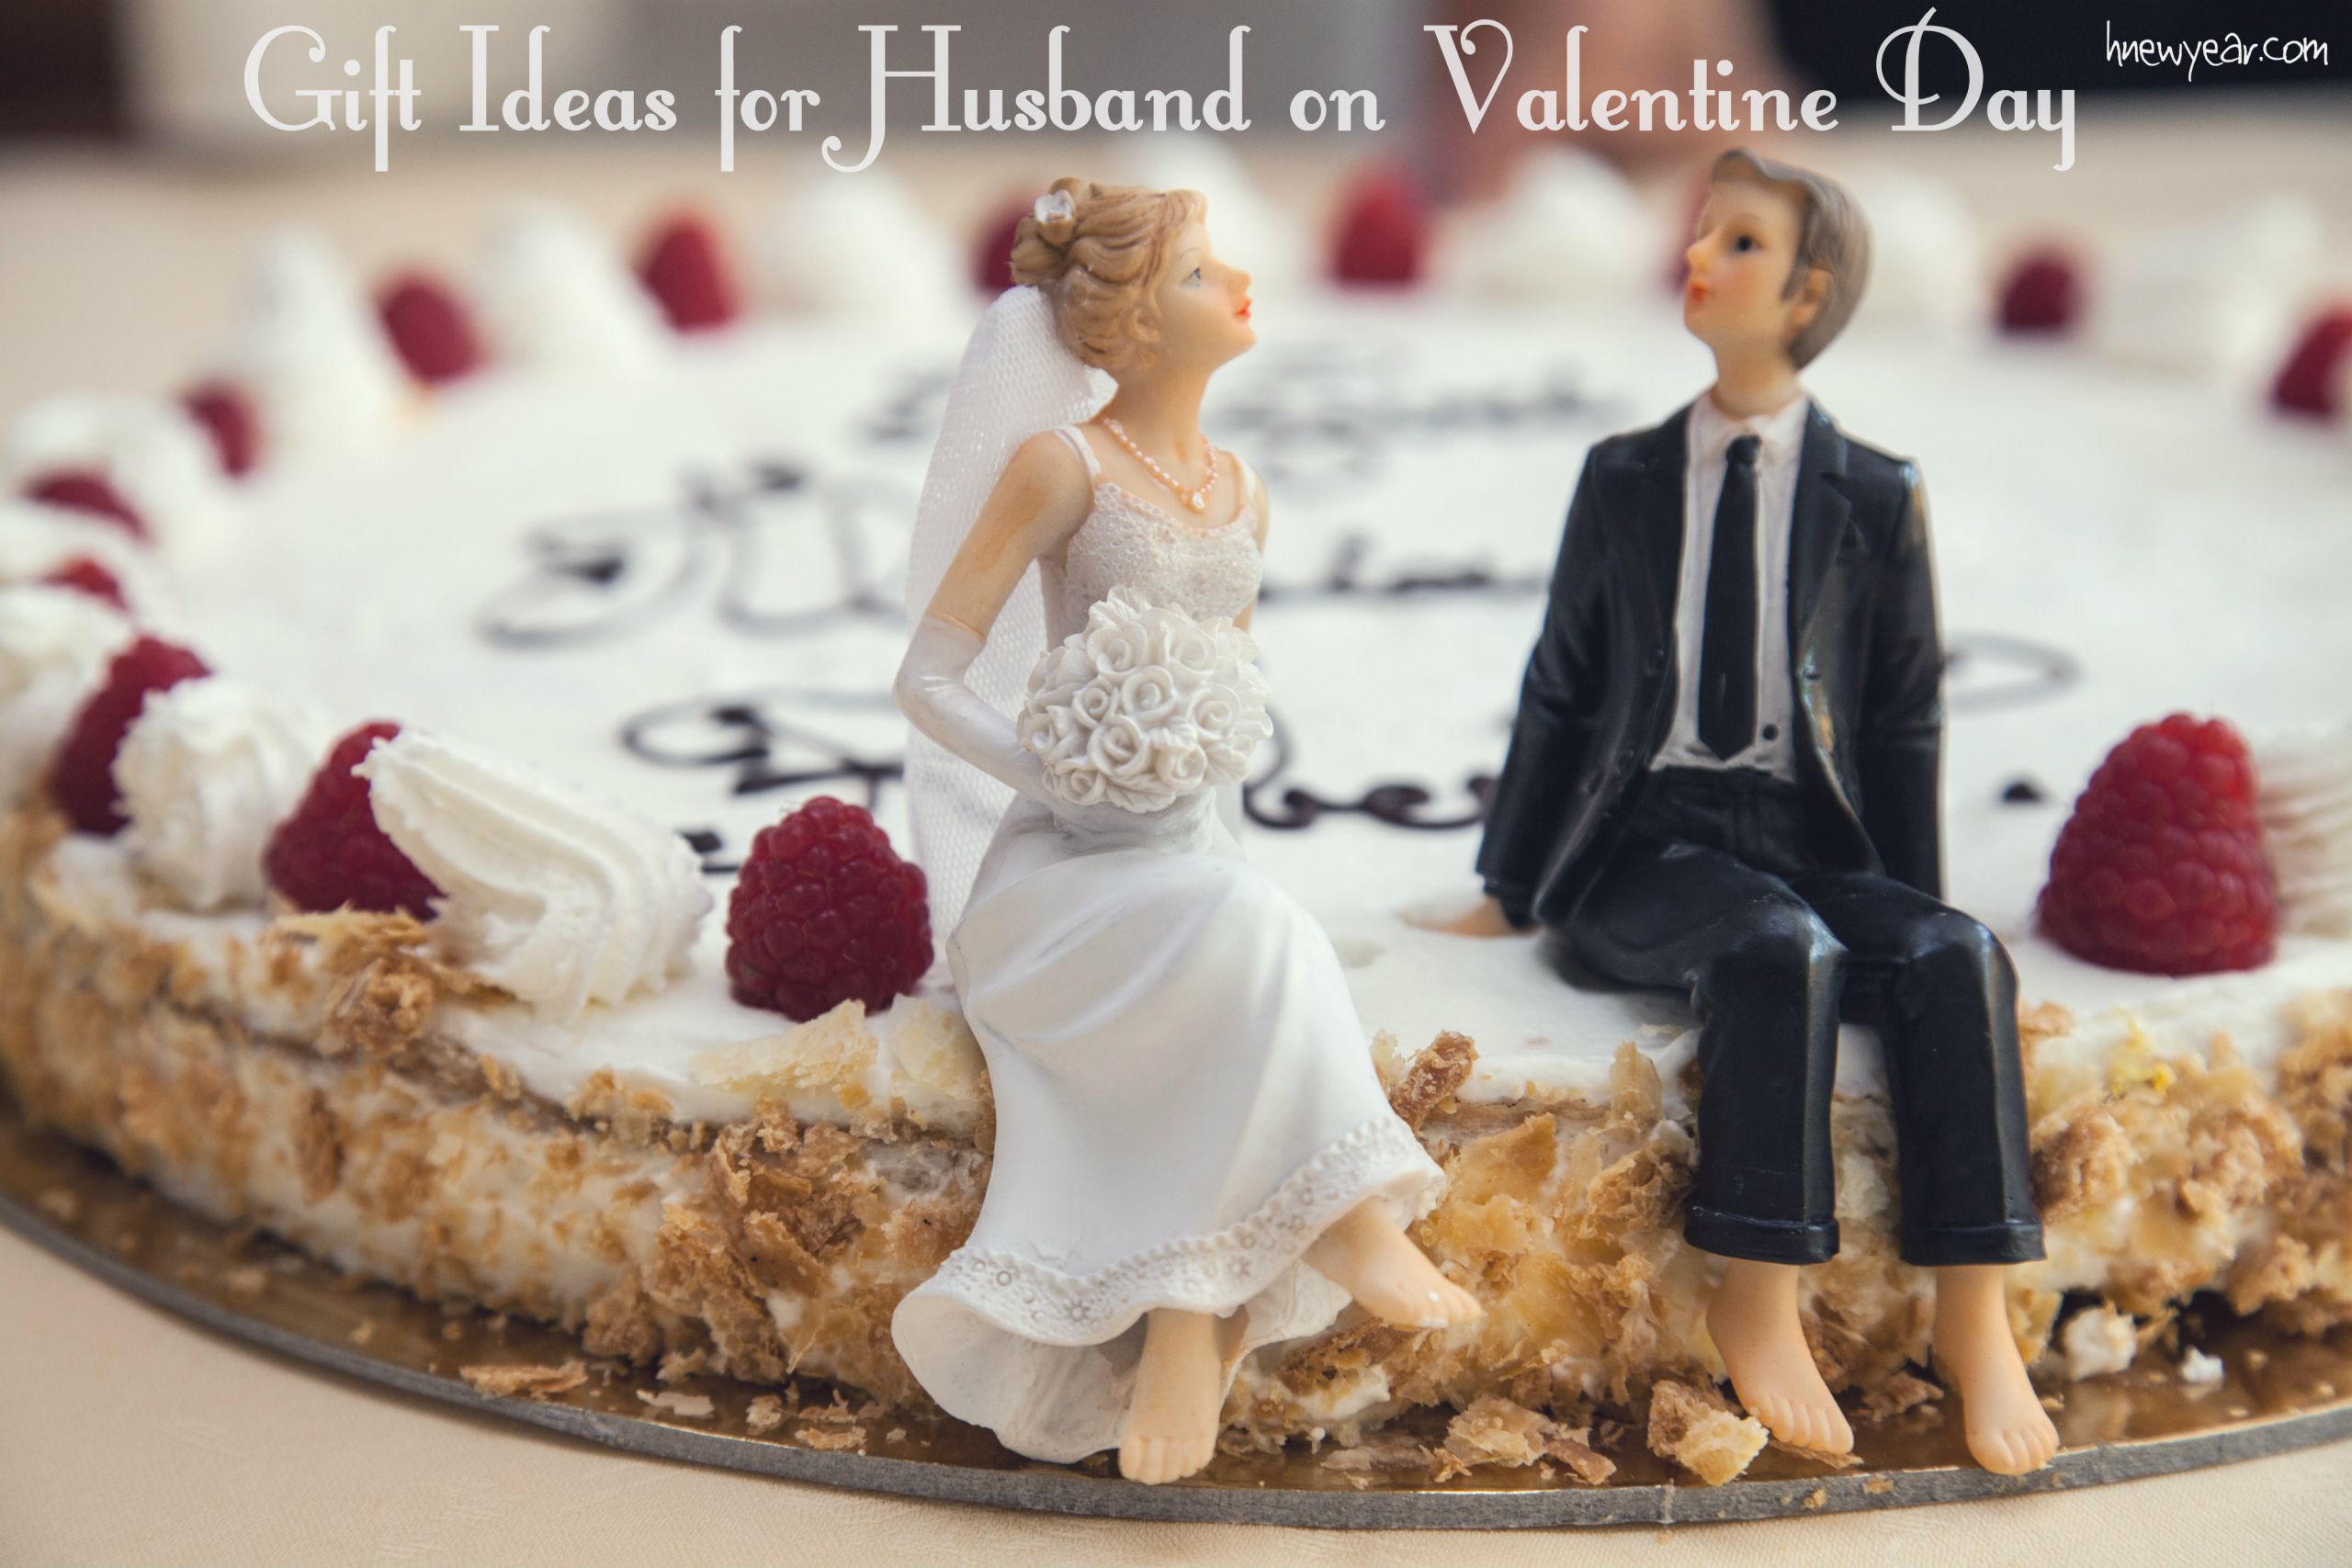 Valentines Day Gifts For Husband
 Ideal Valentine s Day Gift Ideas for Husband Hubby Present